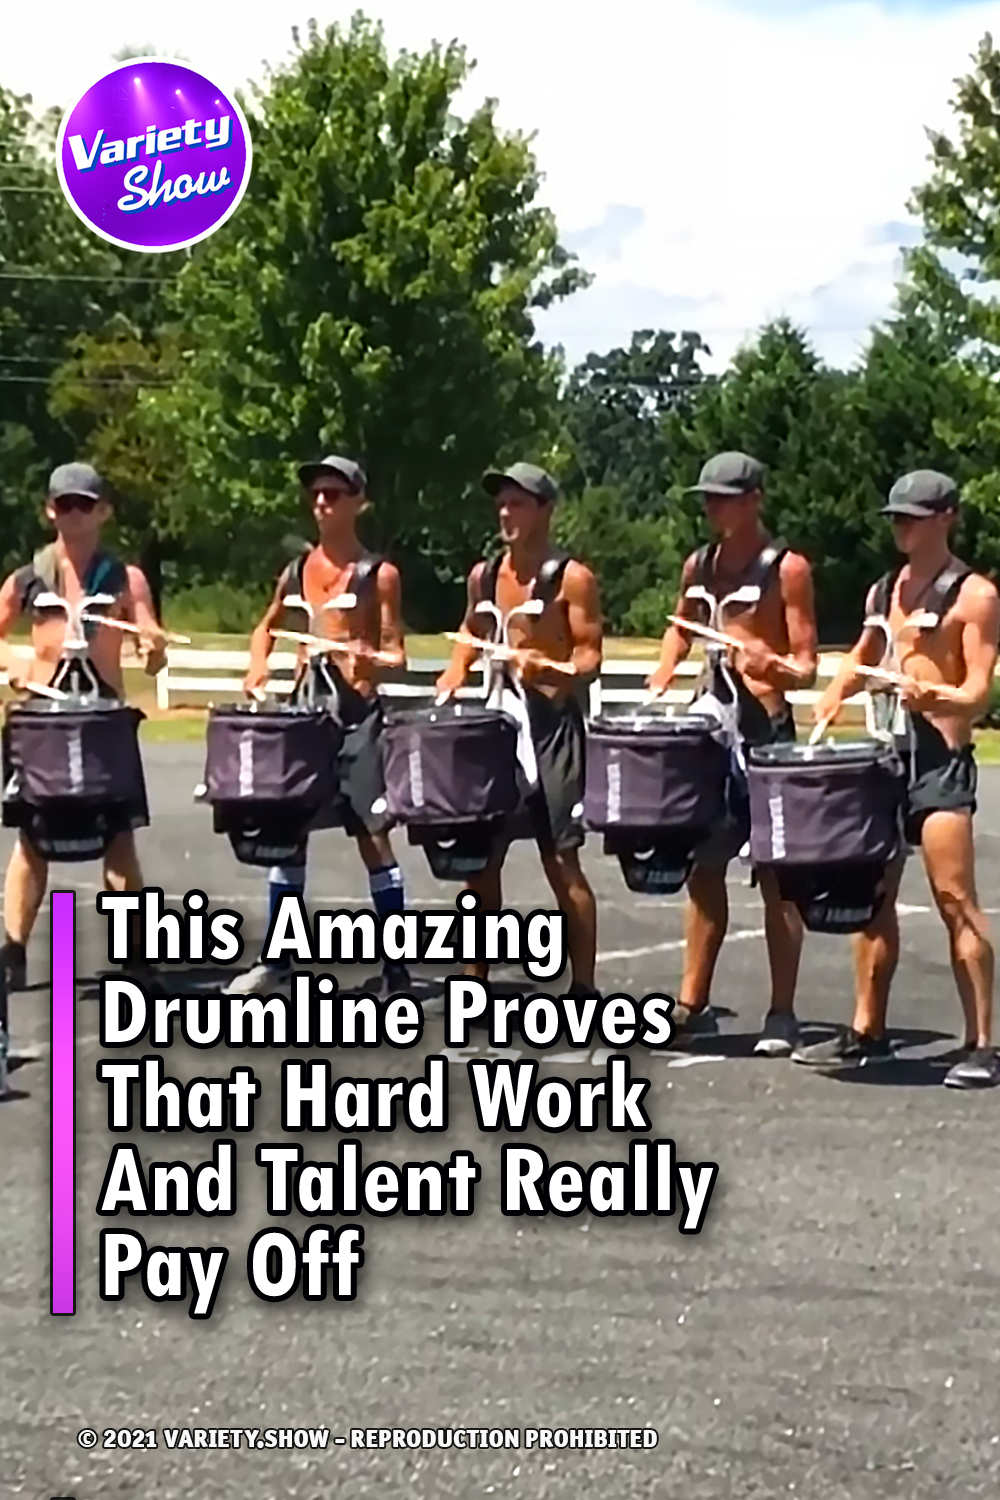 This Amazing Drumline Proves That Hard Work And Talent Really Pay Off